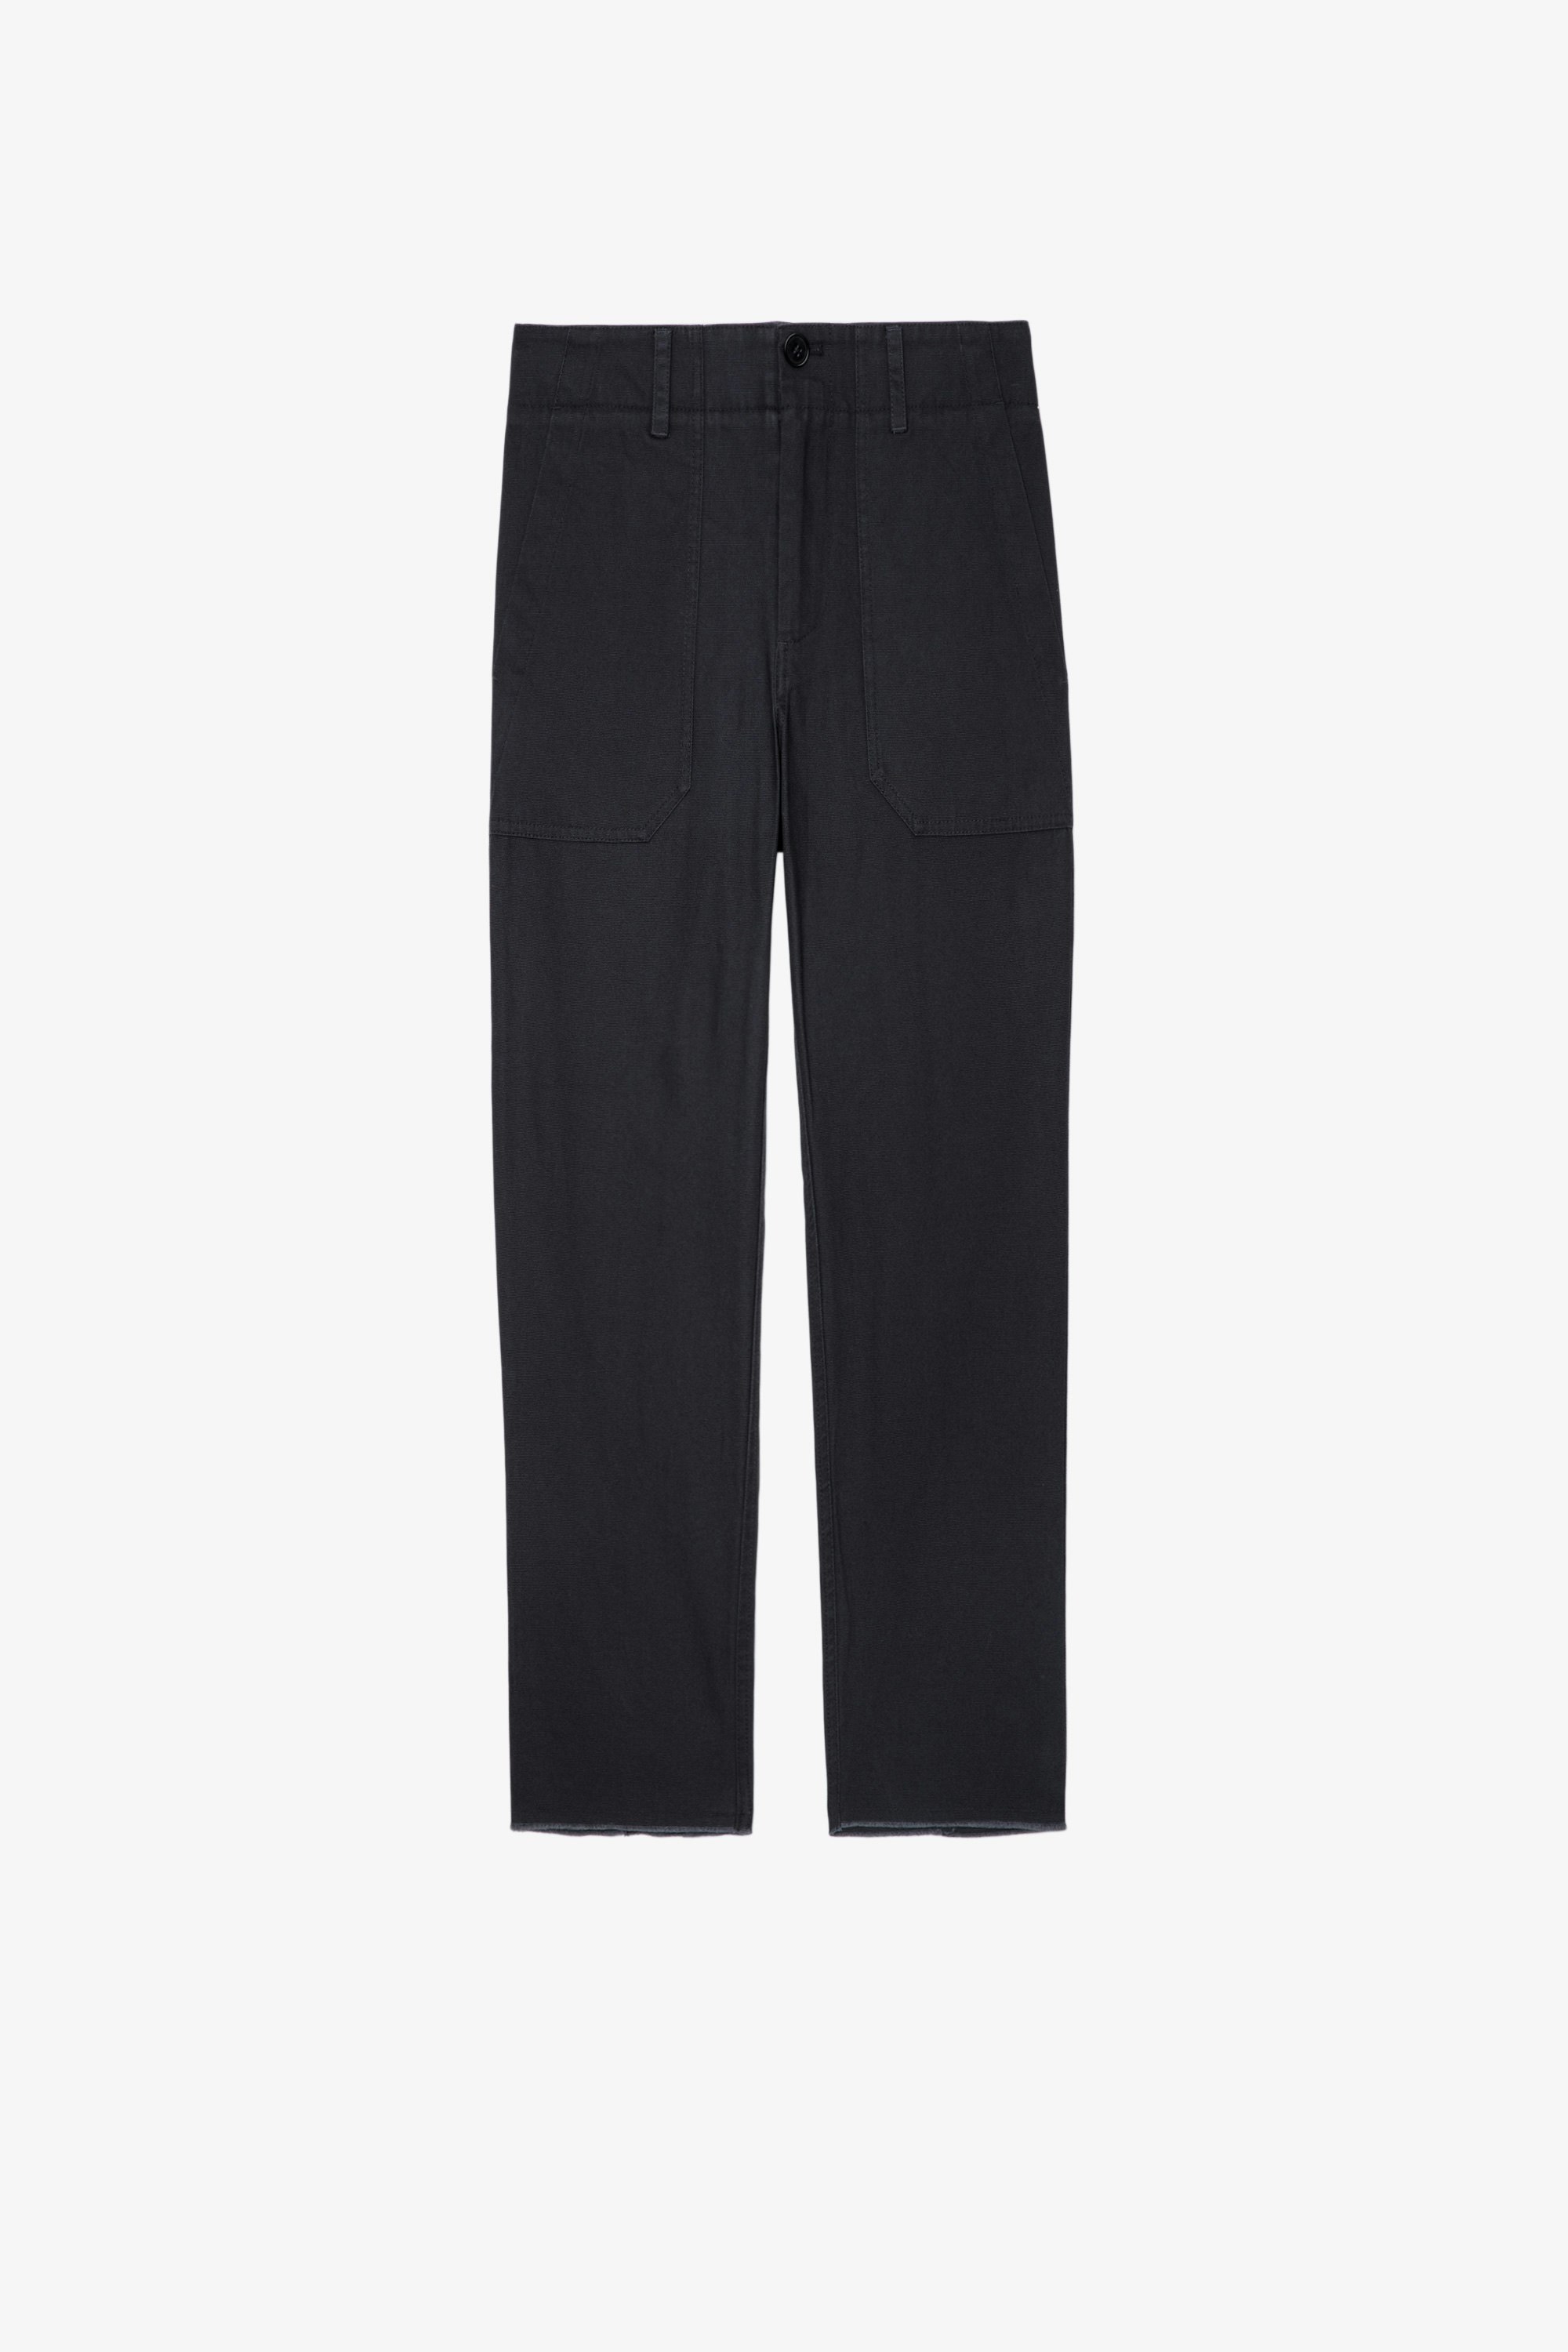 Projet Trousers Women’s trousers in grey cotton denim with embroidery on the back